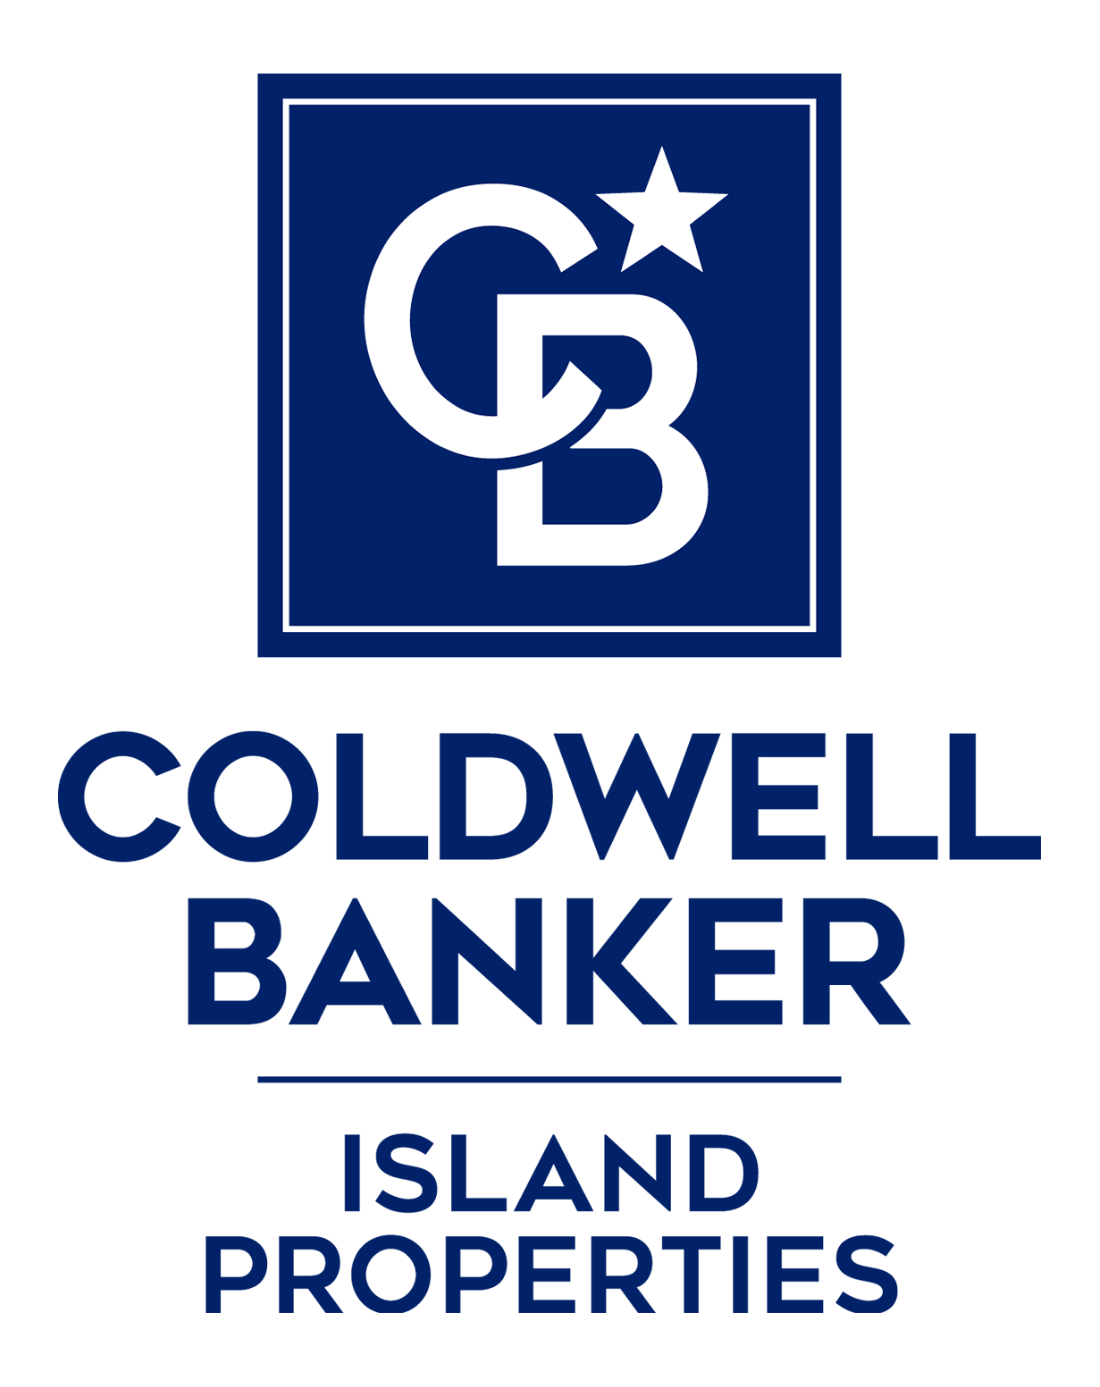 Kelly Anderson - Coldwell Banker Island Properties Logo